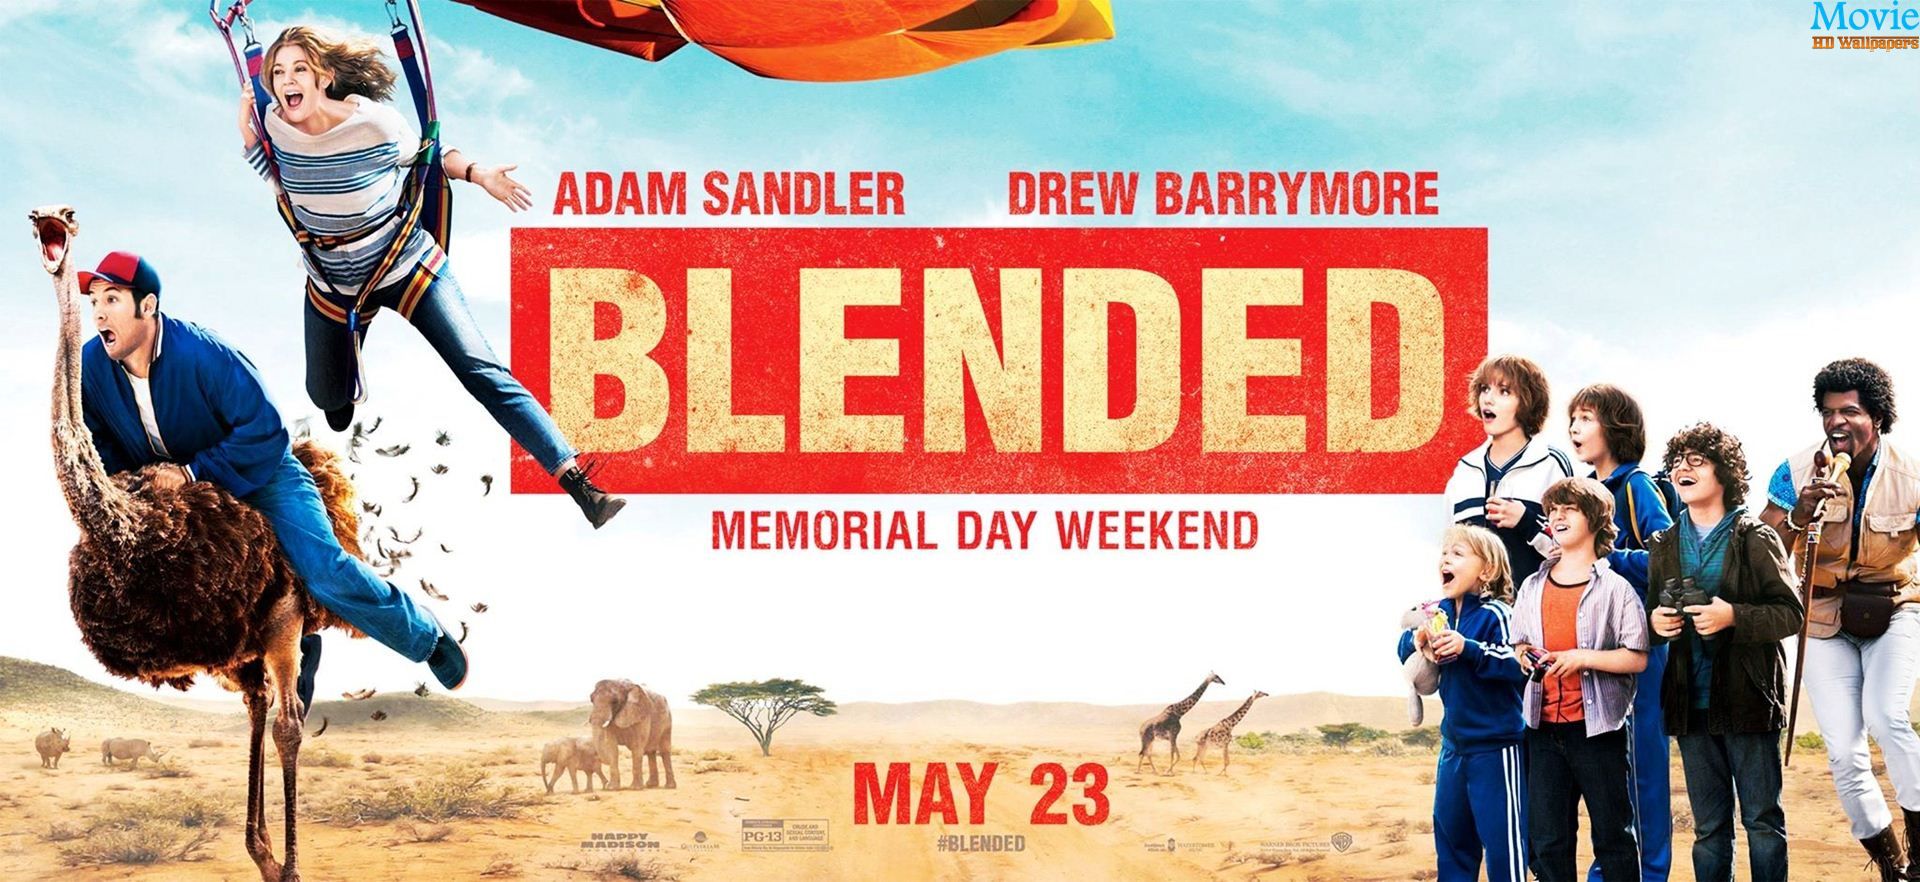 Blended 2014 Movie - Movie HD Wallpapers